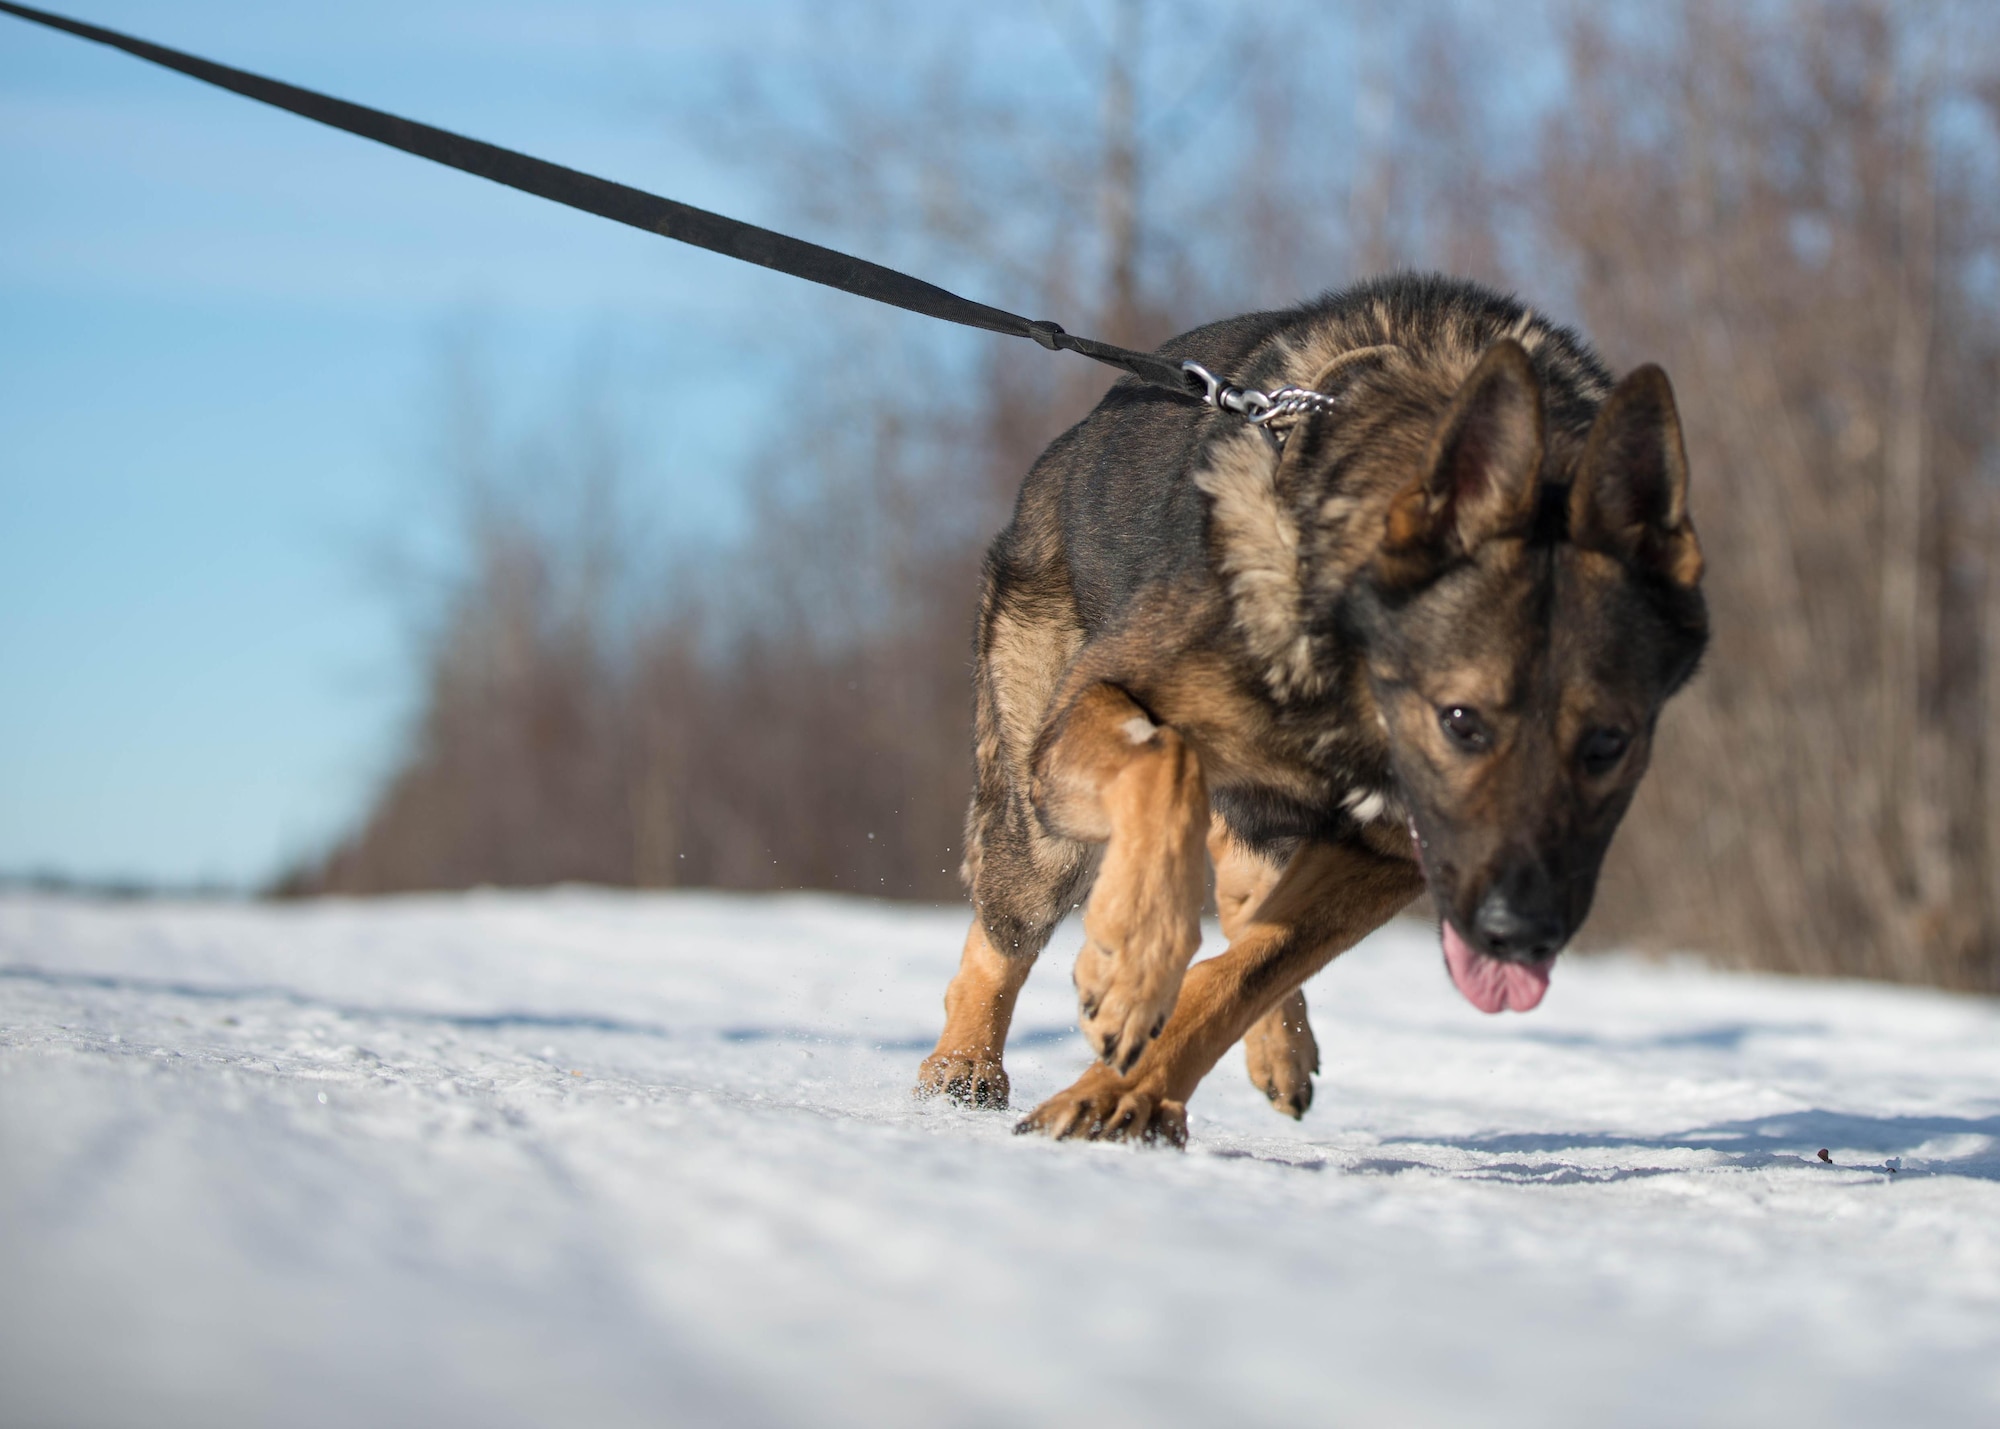 Cage, a military working dog with the 354th Security Forces Squadron, rushes down a trail March 7, 2016, at Eielson Air Force Base, Alaska, while working with his handler Staff Sgt. Barret Chappelle. K-9 teams patrol the massive base four hours a day protecting assets at the top of the world in the U.S. Air Force’s Pacific theater of operations. (U.S. Air Force photo by Staff Sgt. Shawn Nickel/Released)